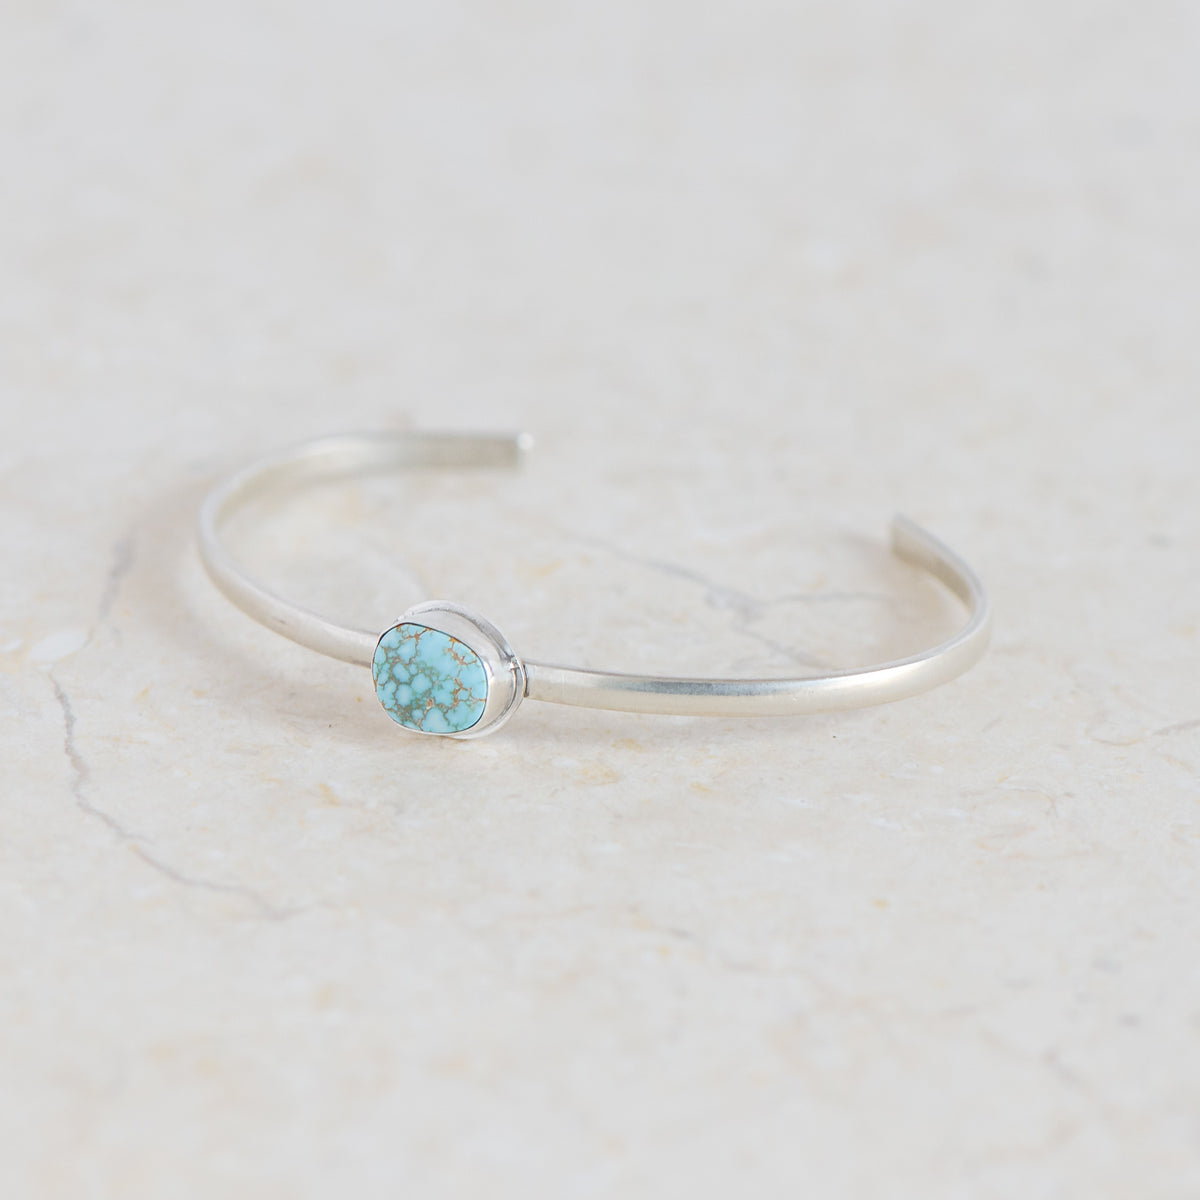 Turquoise and Silver Stacking Cuff. Handmade in the Uk by Laura De Zordo Jewellery